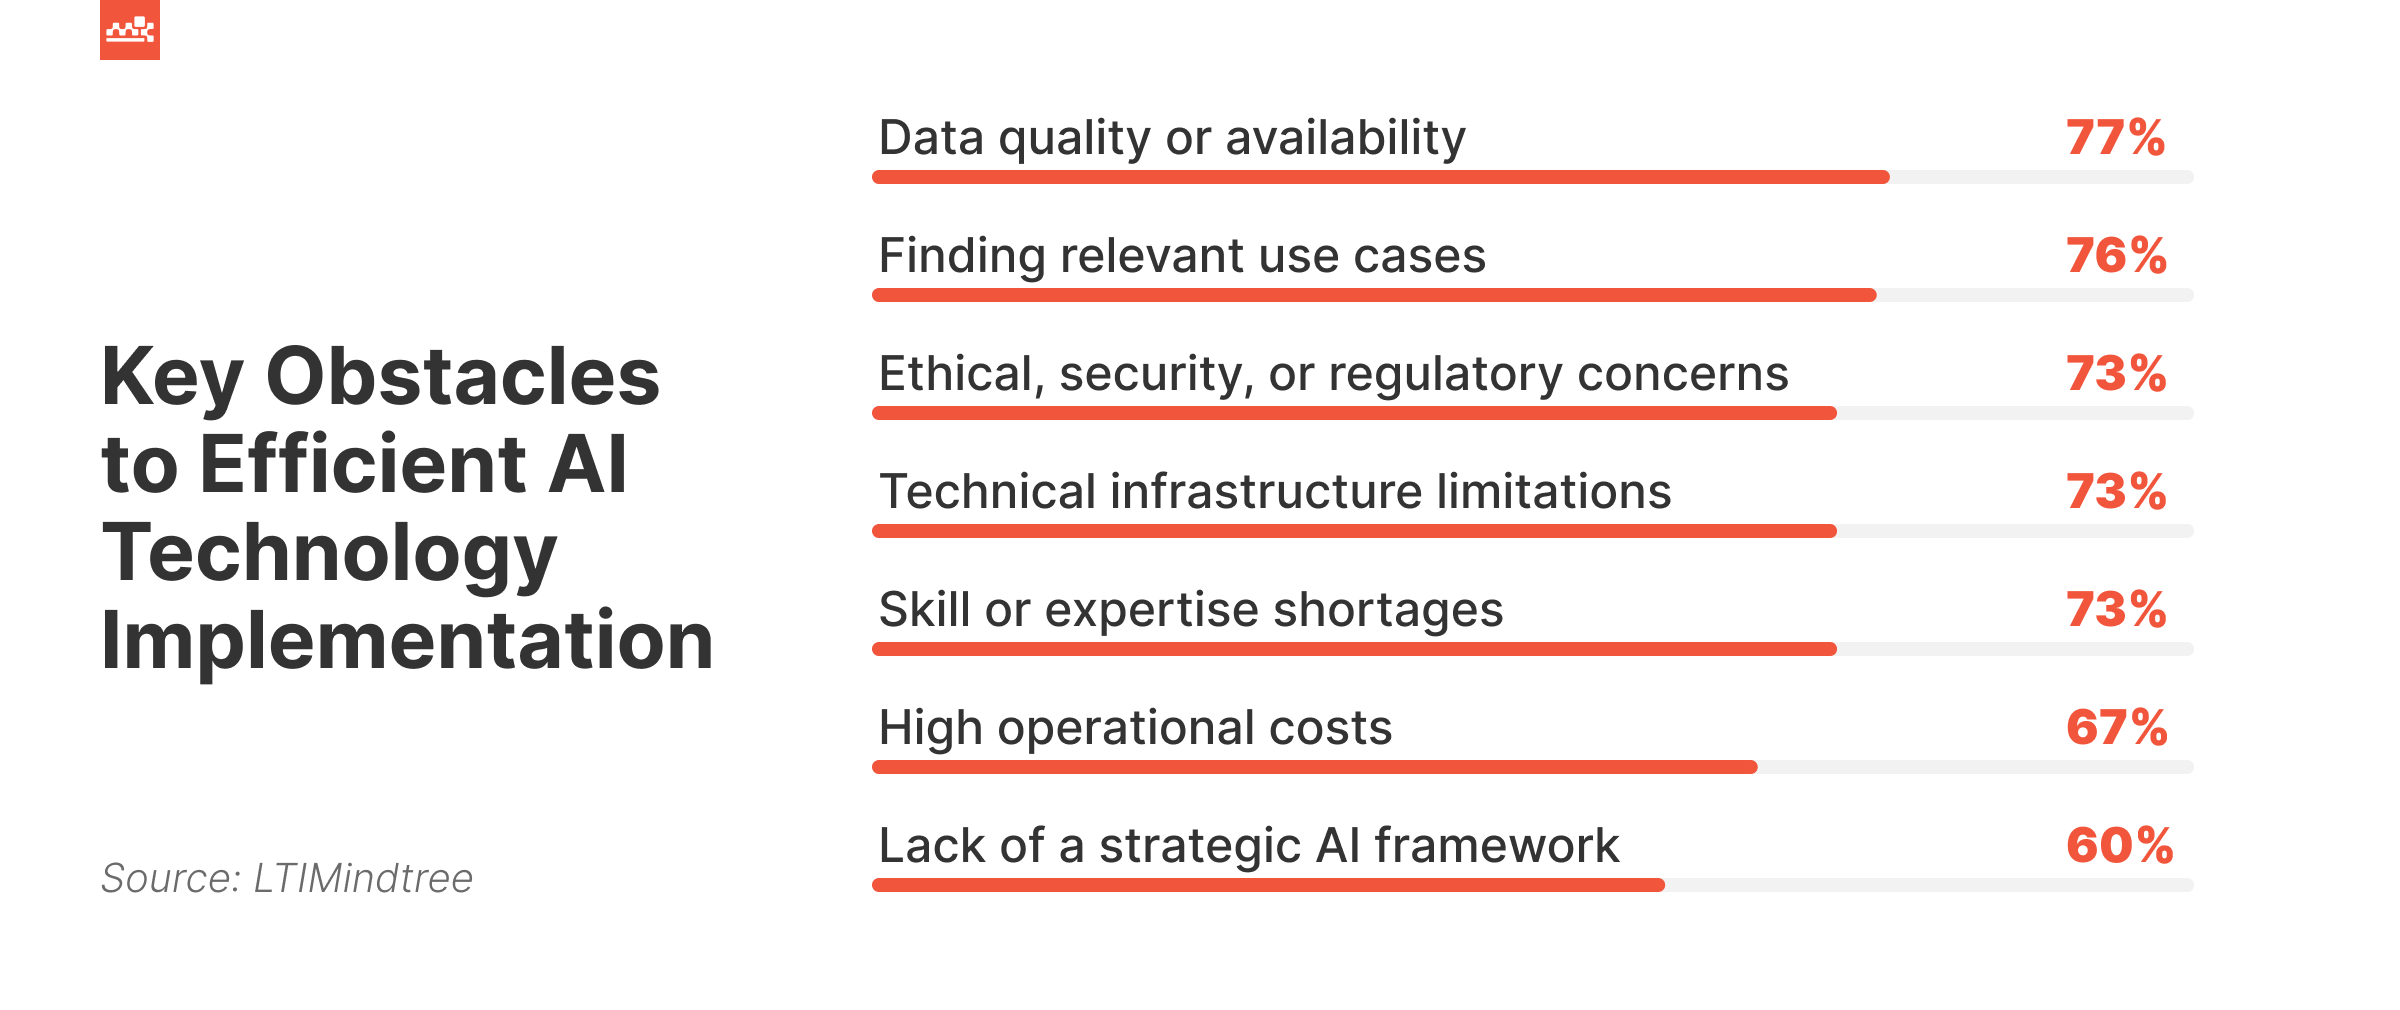 Obstacles for AI Implementation